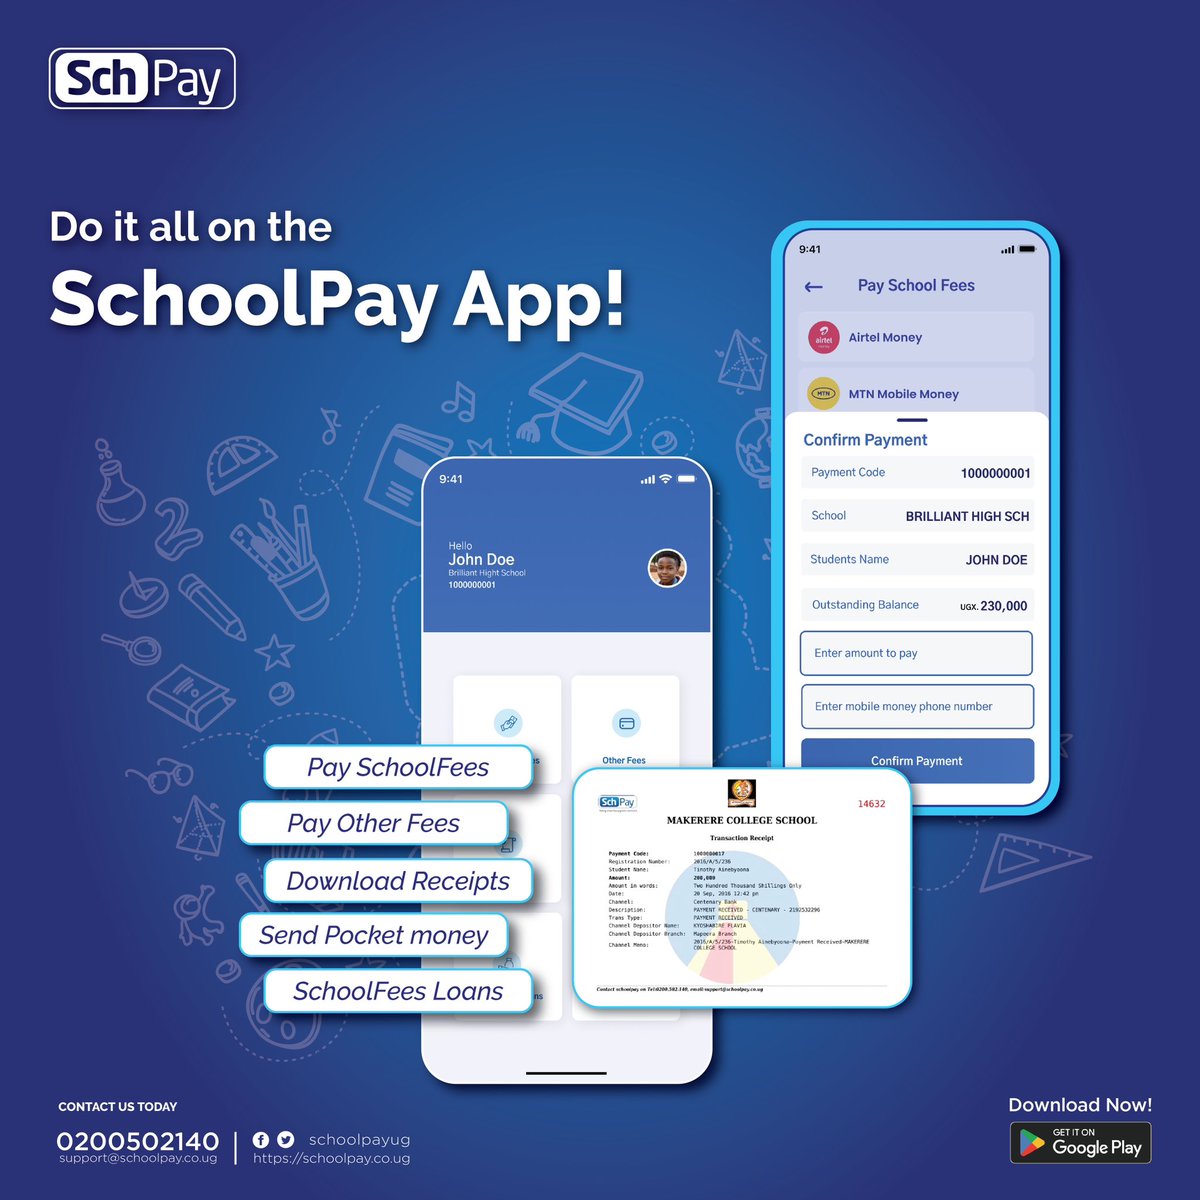 Start the week in style with the SchoolPay App.. 
Do it all on the go.
#DownloadNow
#SchoolPayApp